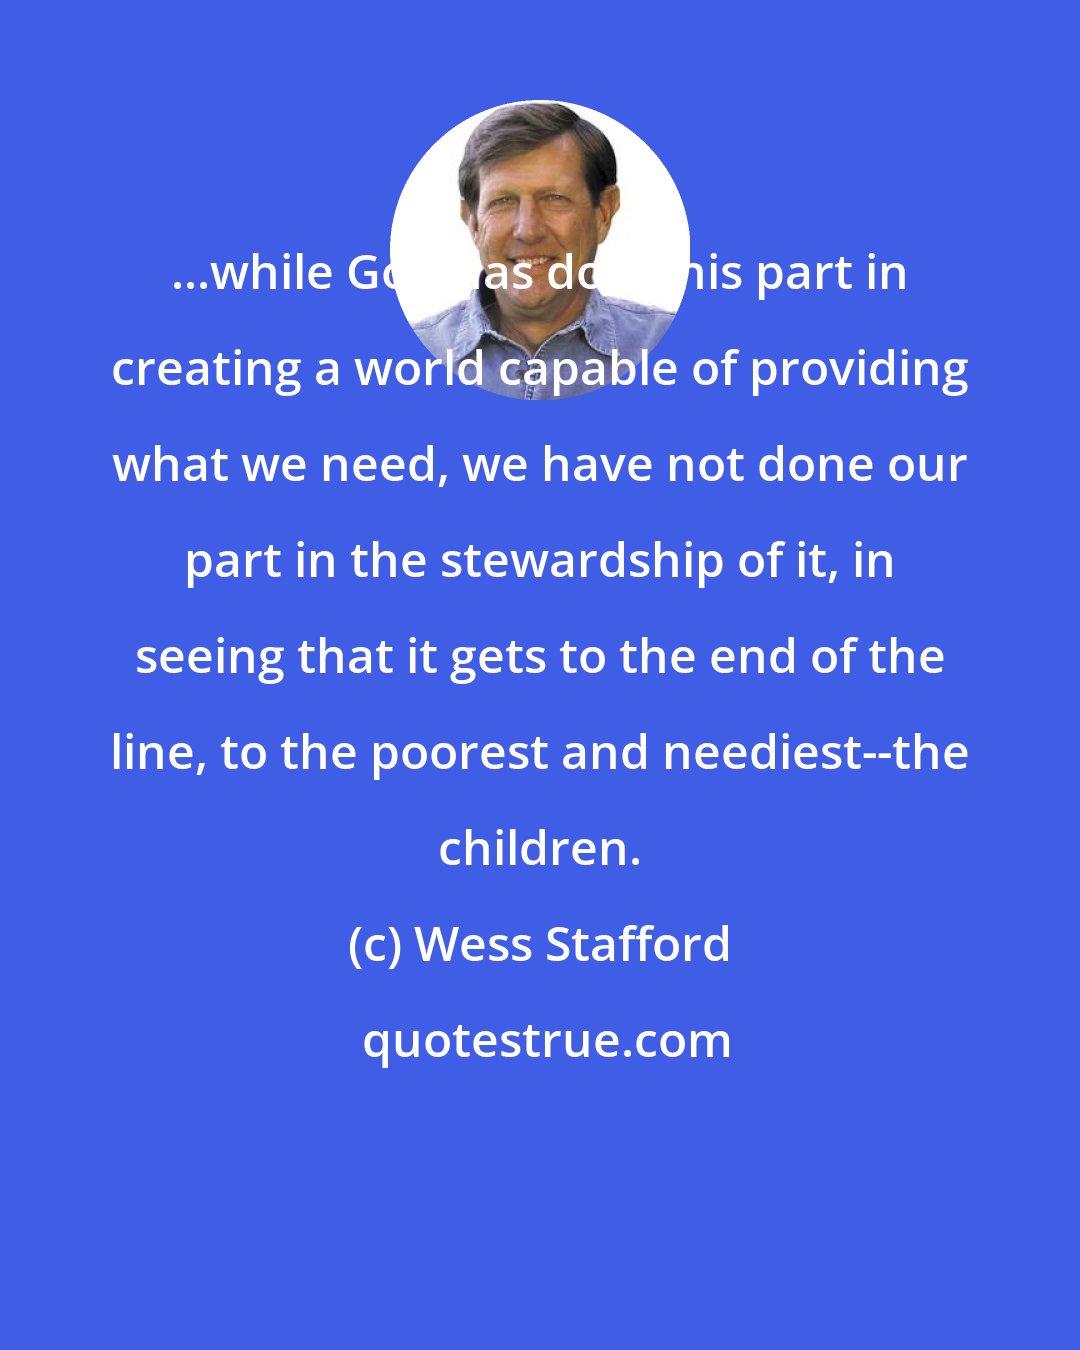 Wess Stafford: ...while God has done his part in creating a world capable of providing what we need, we have not done our part in the stewardship of it, in seeing that it gets to the end of the line, to the poorest and neediest--the children.